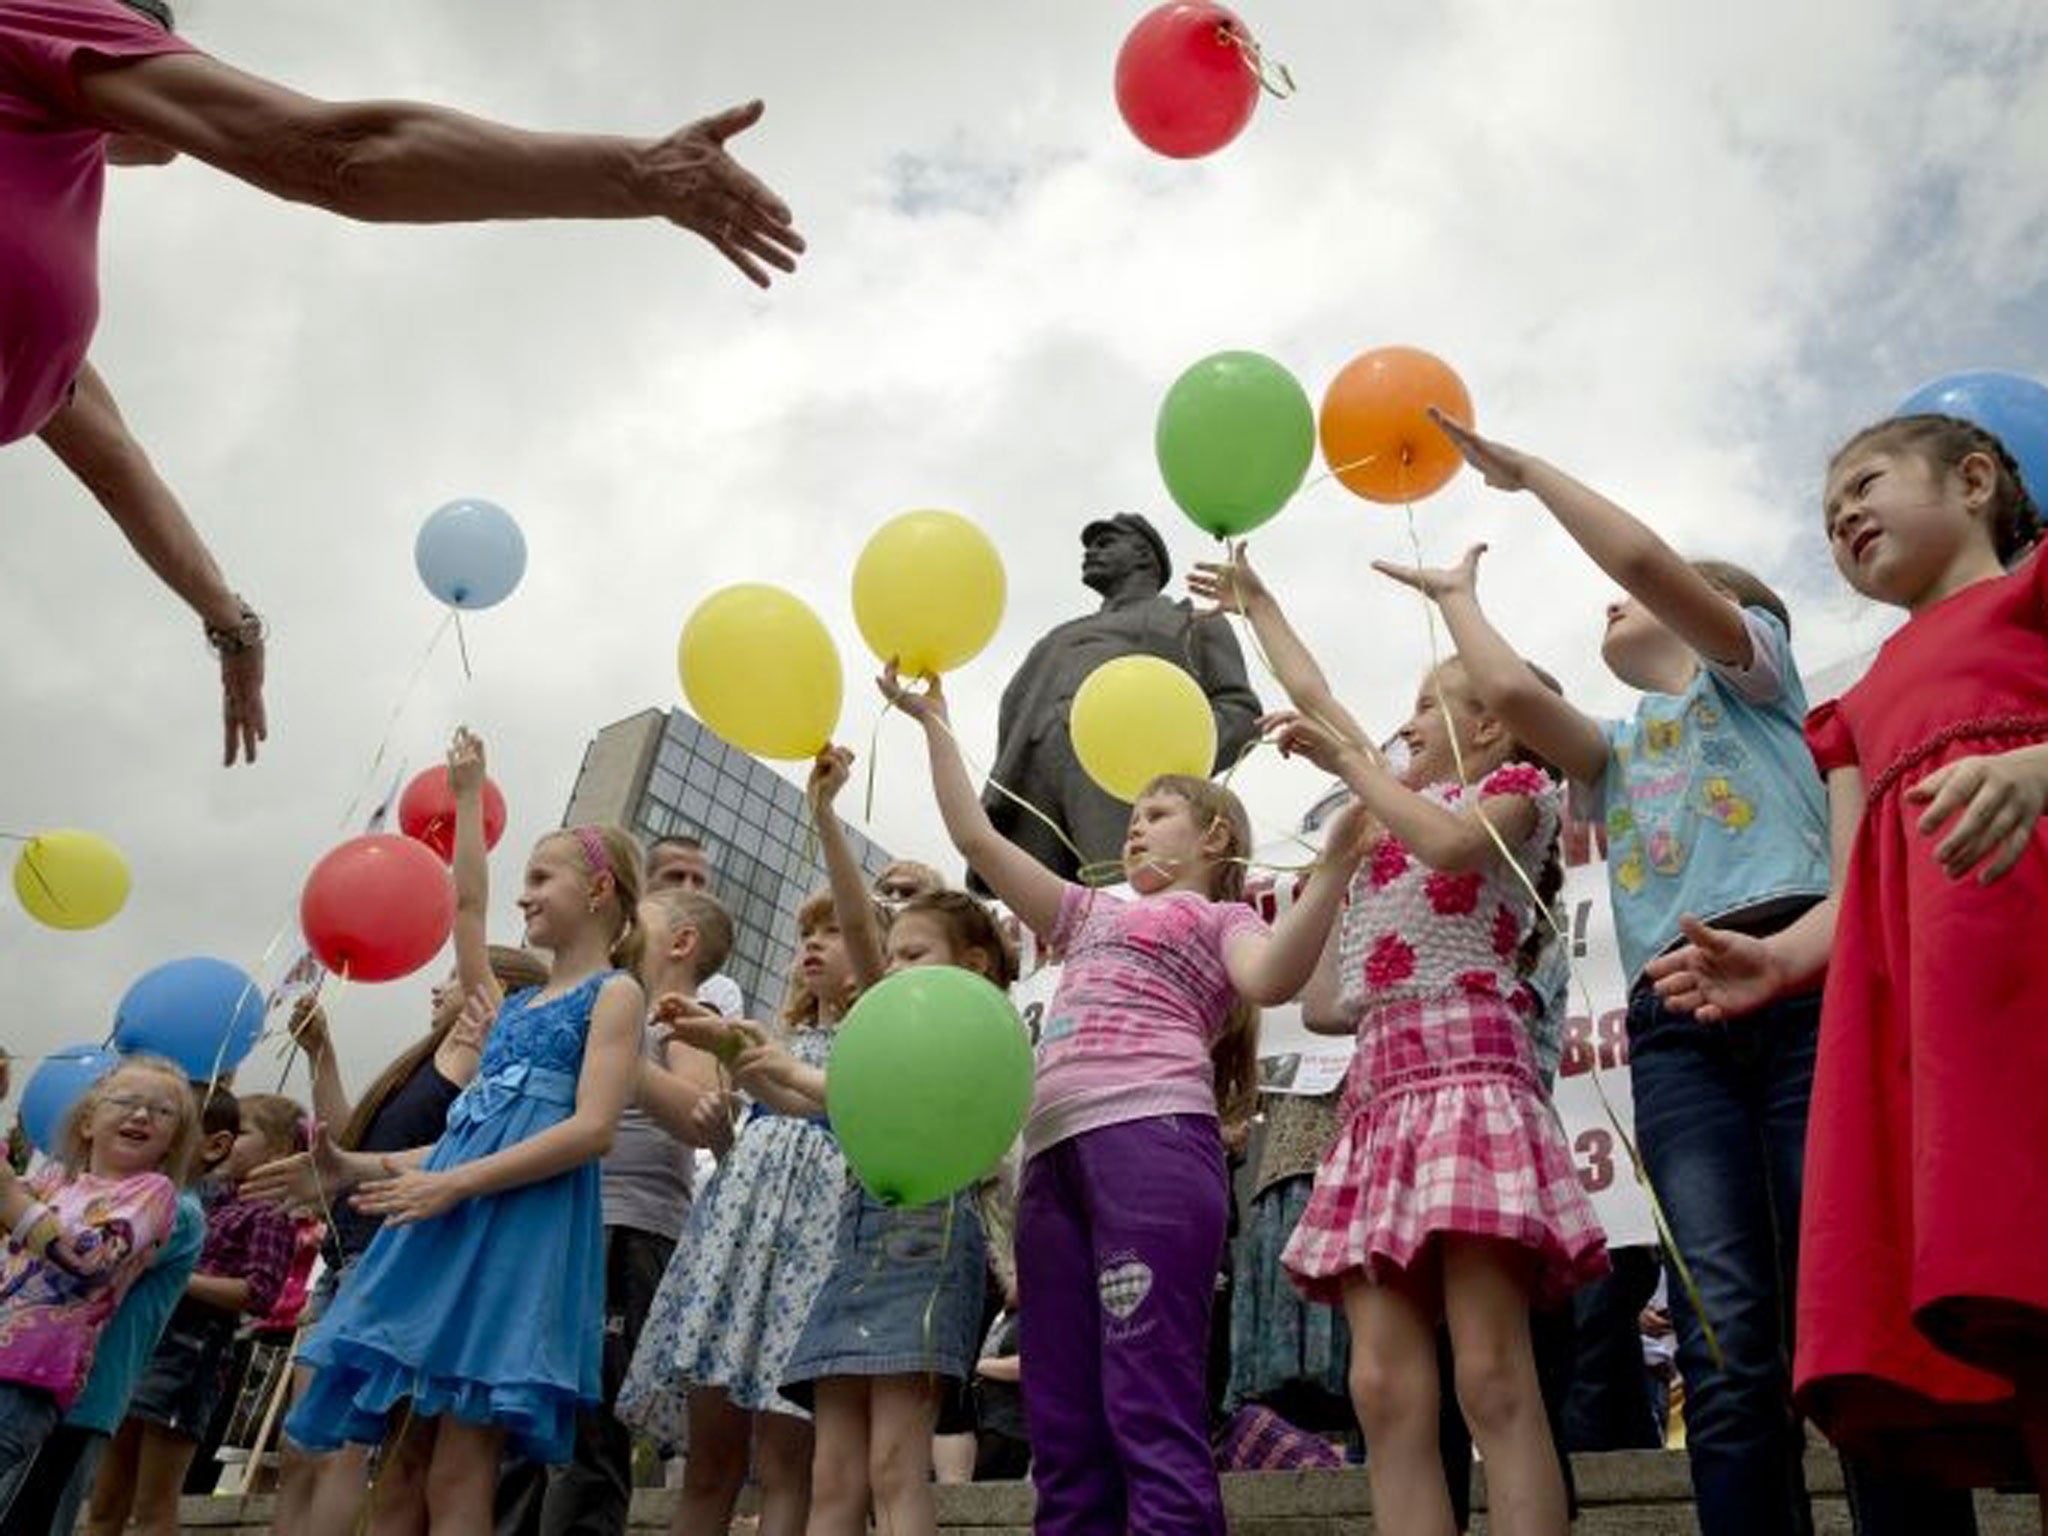 Children release balloons, back dropped by a statue of Lenin, during a pro-Russian rally in Donetsk, Ukraine, Sunday, June 1, 2014.